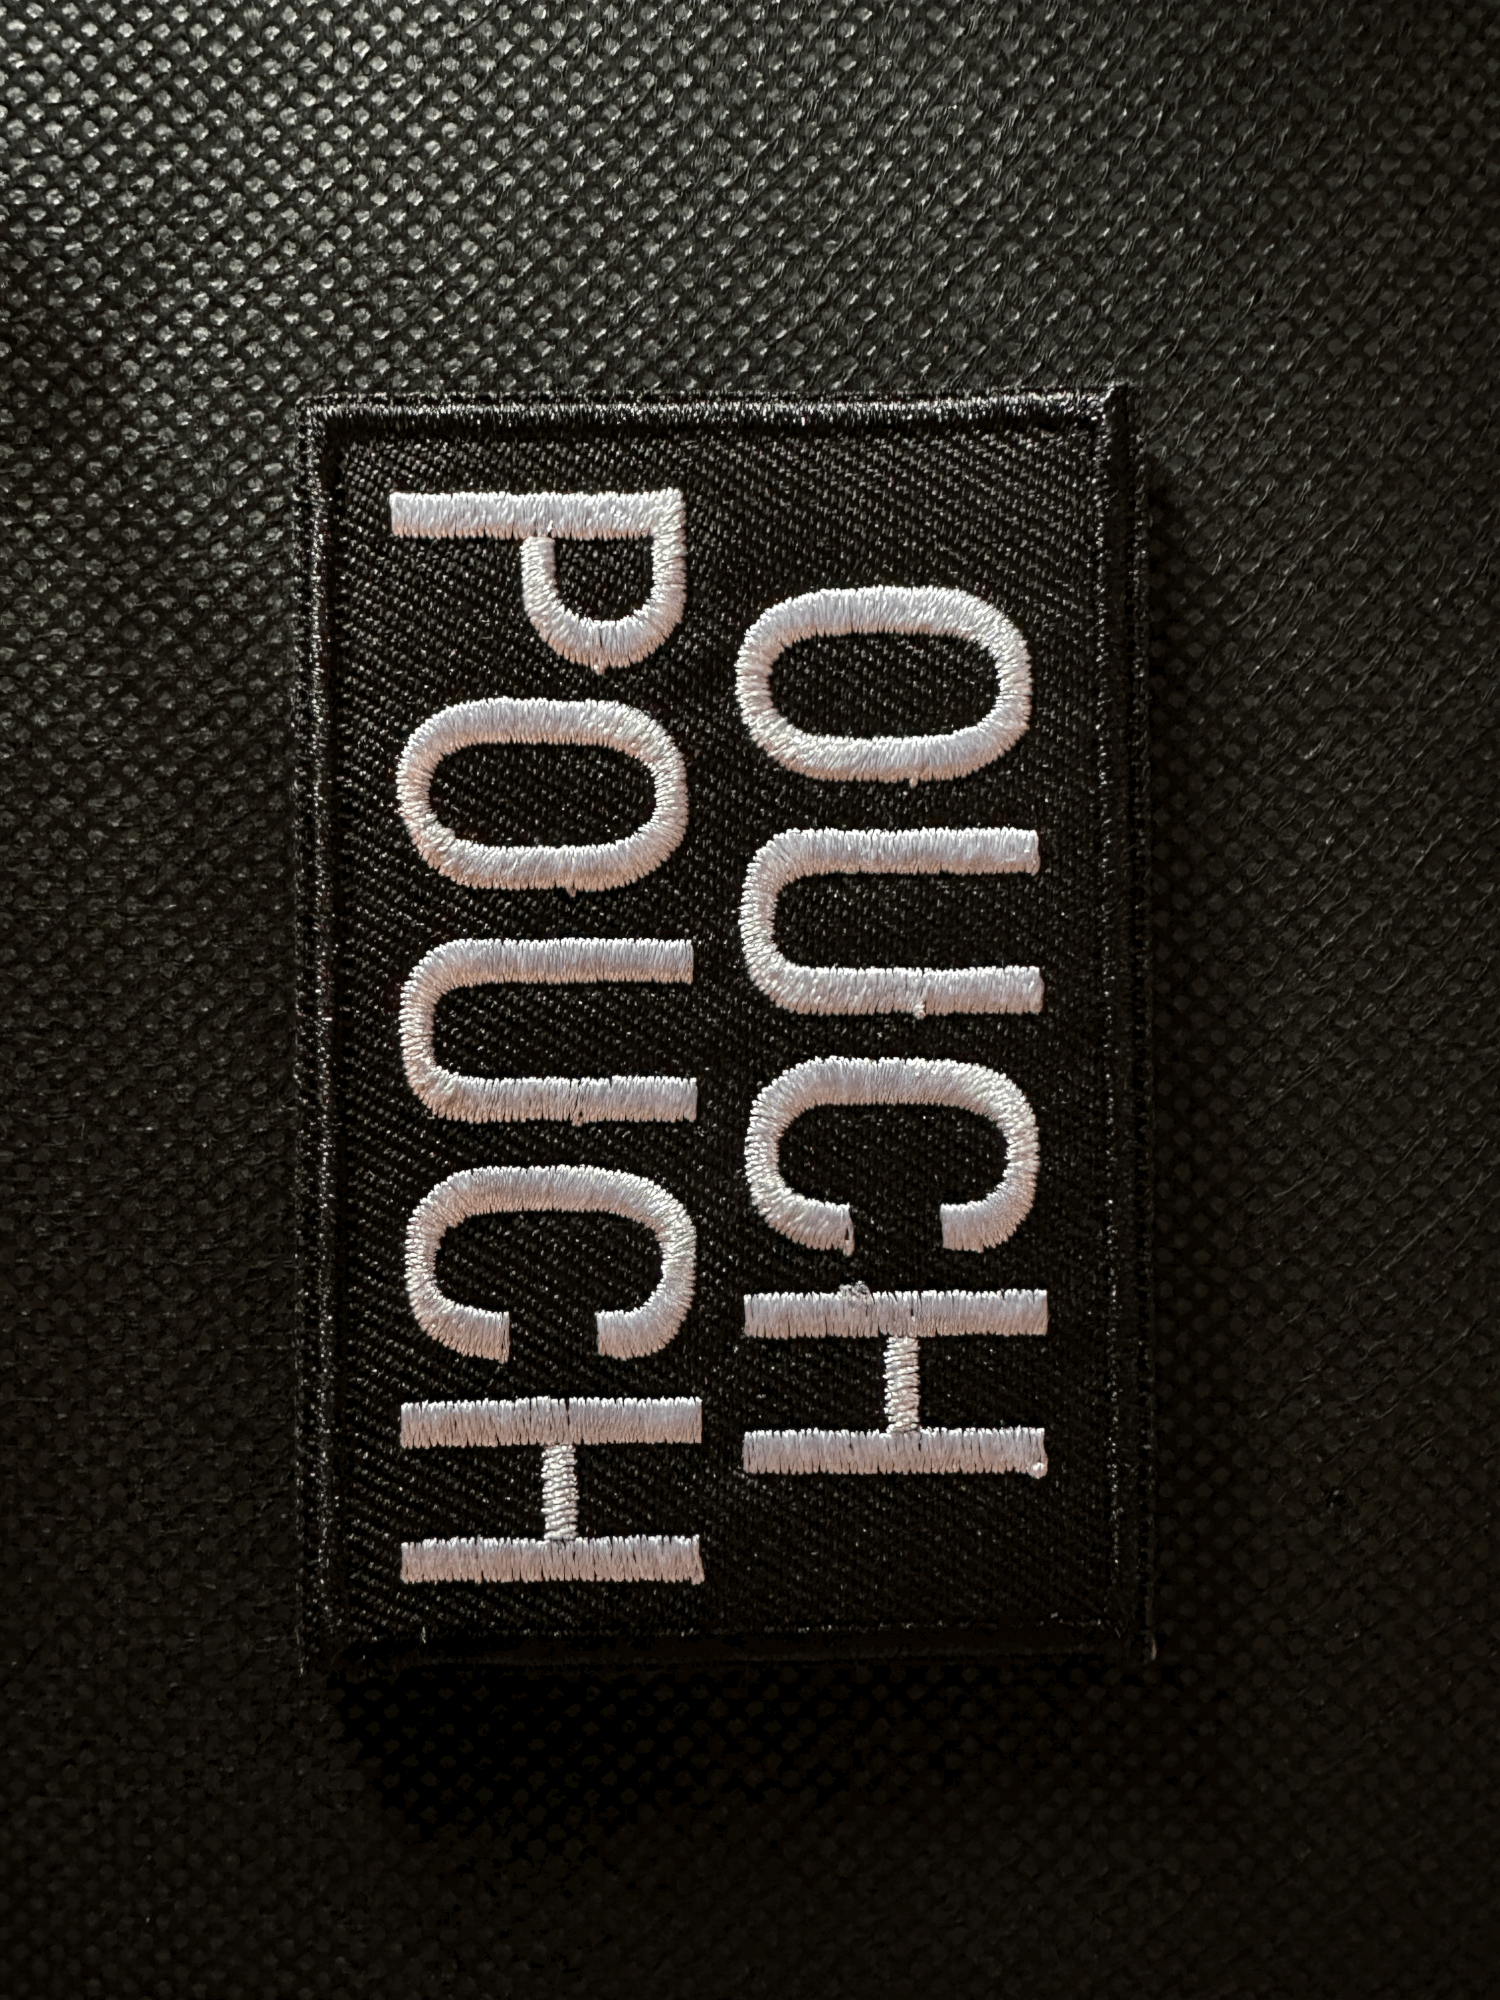 Ouch Pouch patch — HEROIC GEAR